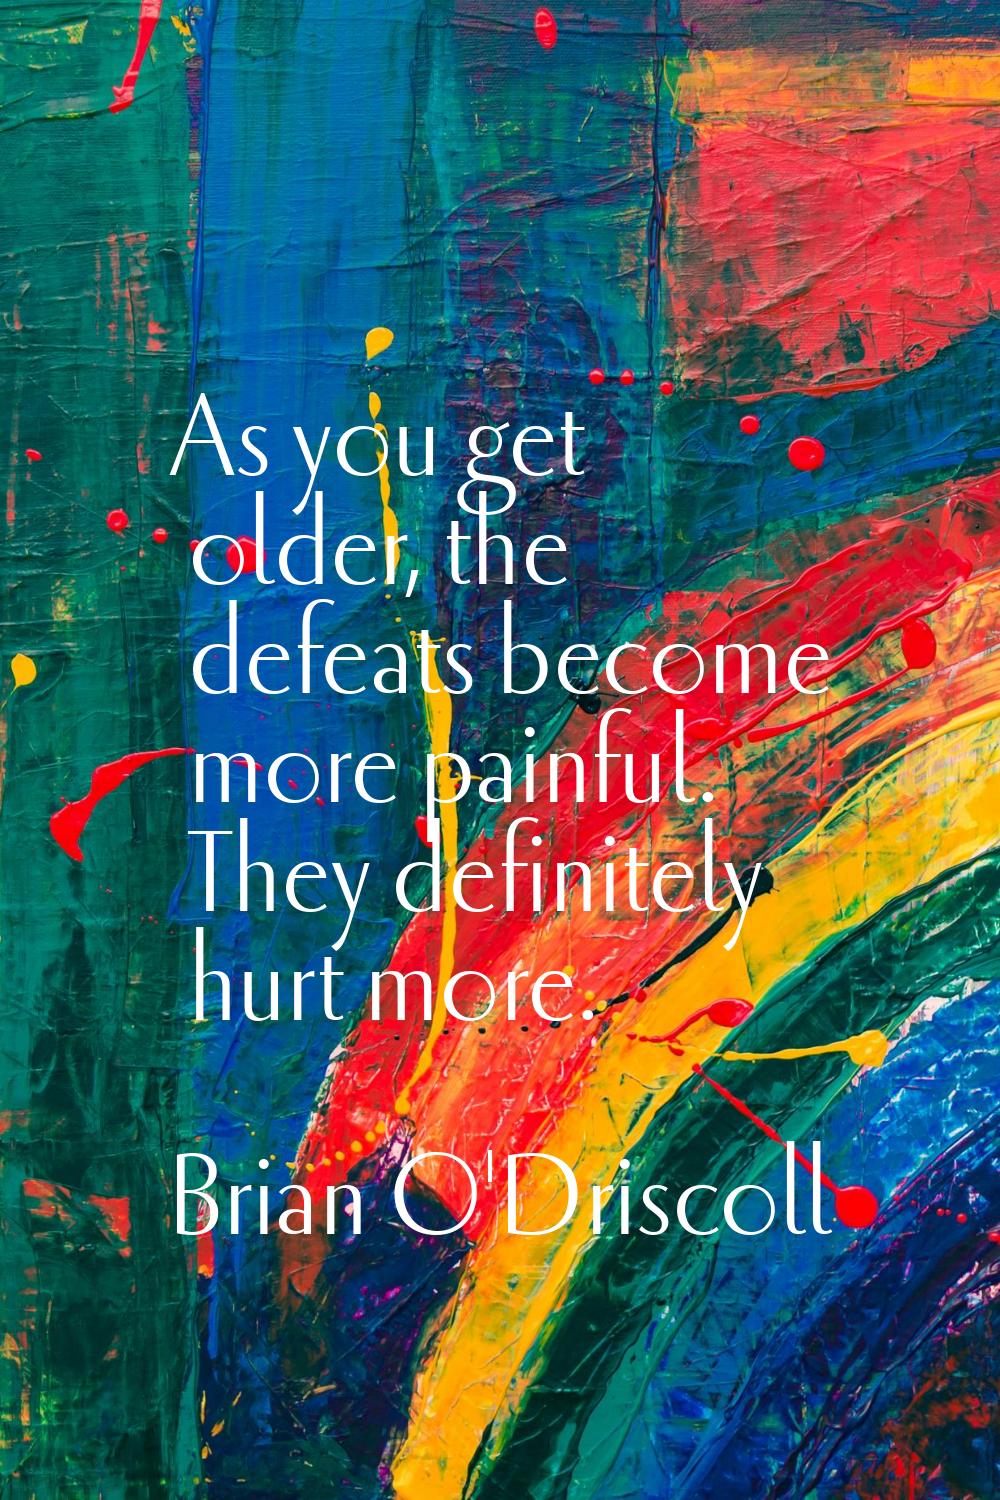 As you get older, the defeats become more painful. They definitely hurt more.